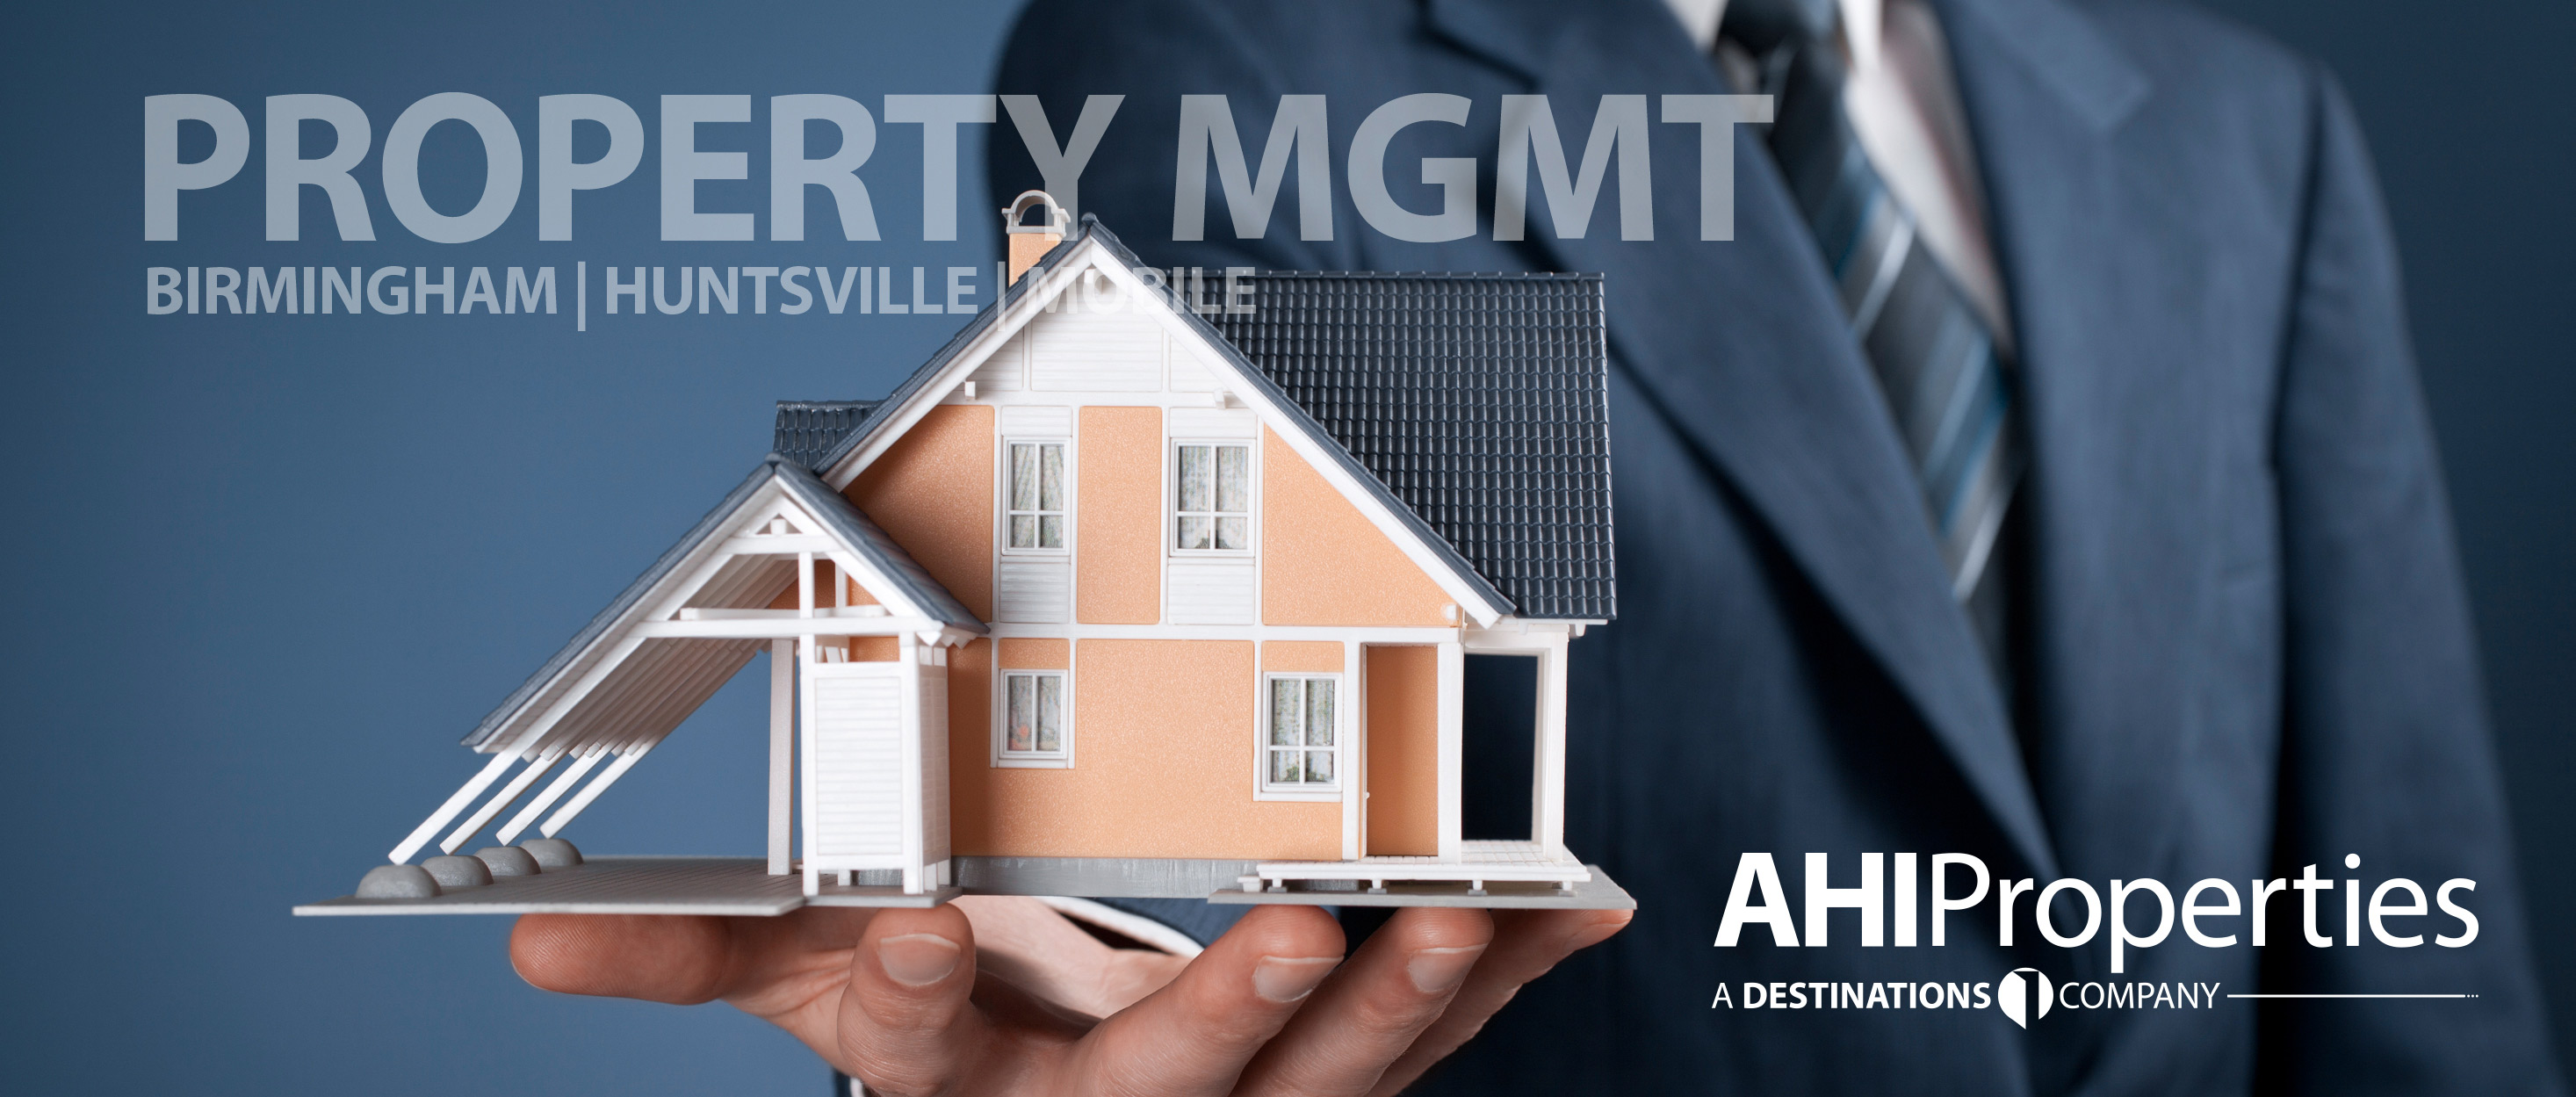 AHI Properties offers property management services in Birmingham, Huntsville, and Mobile Alabama